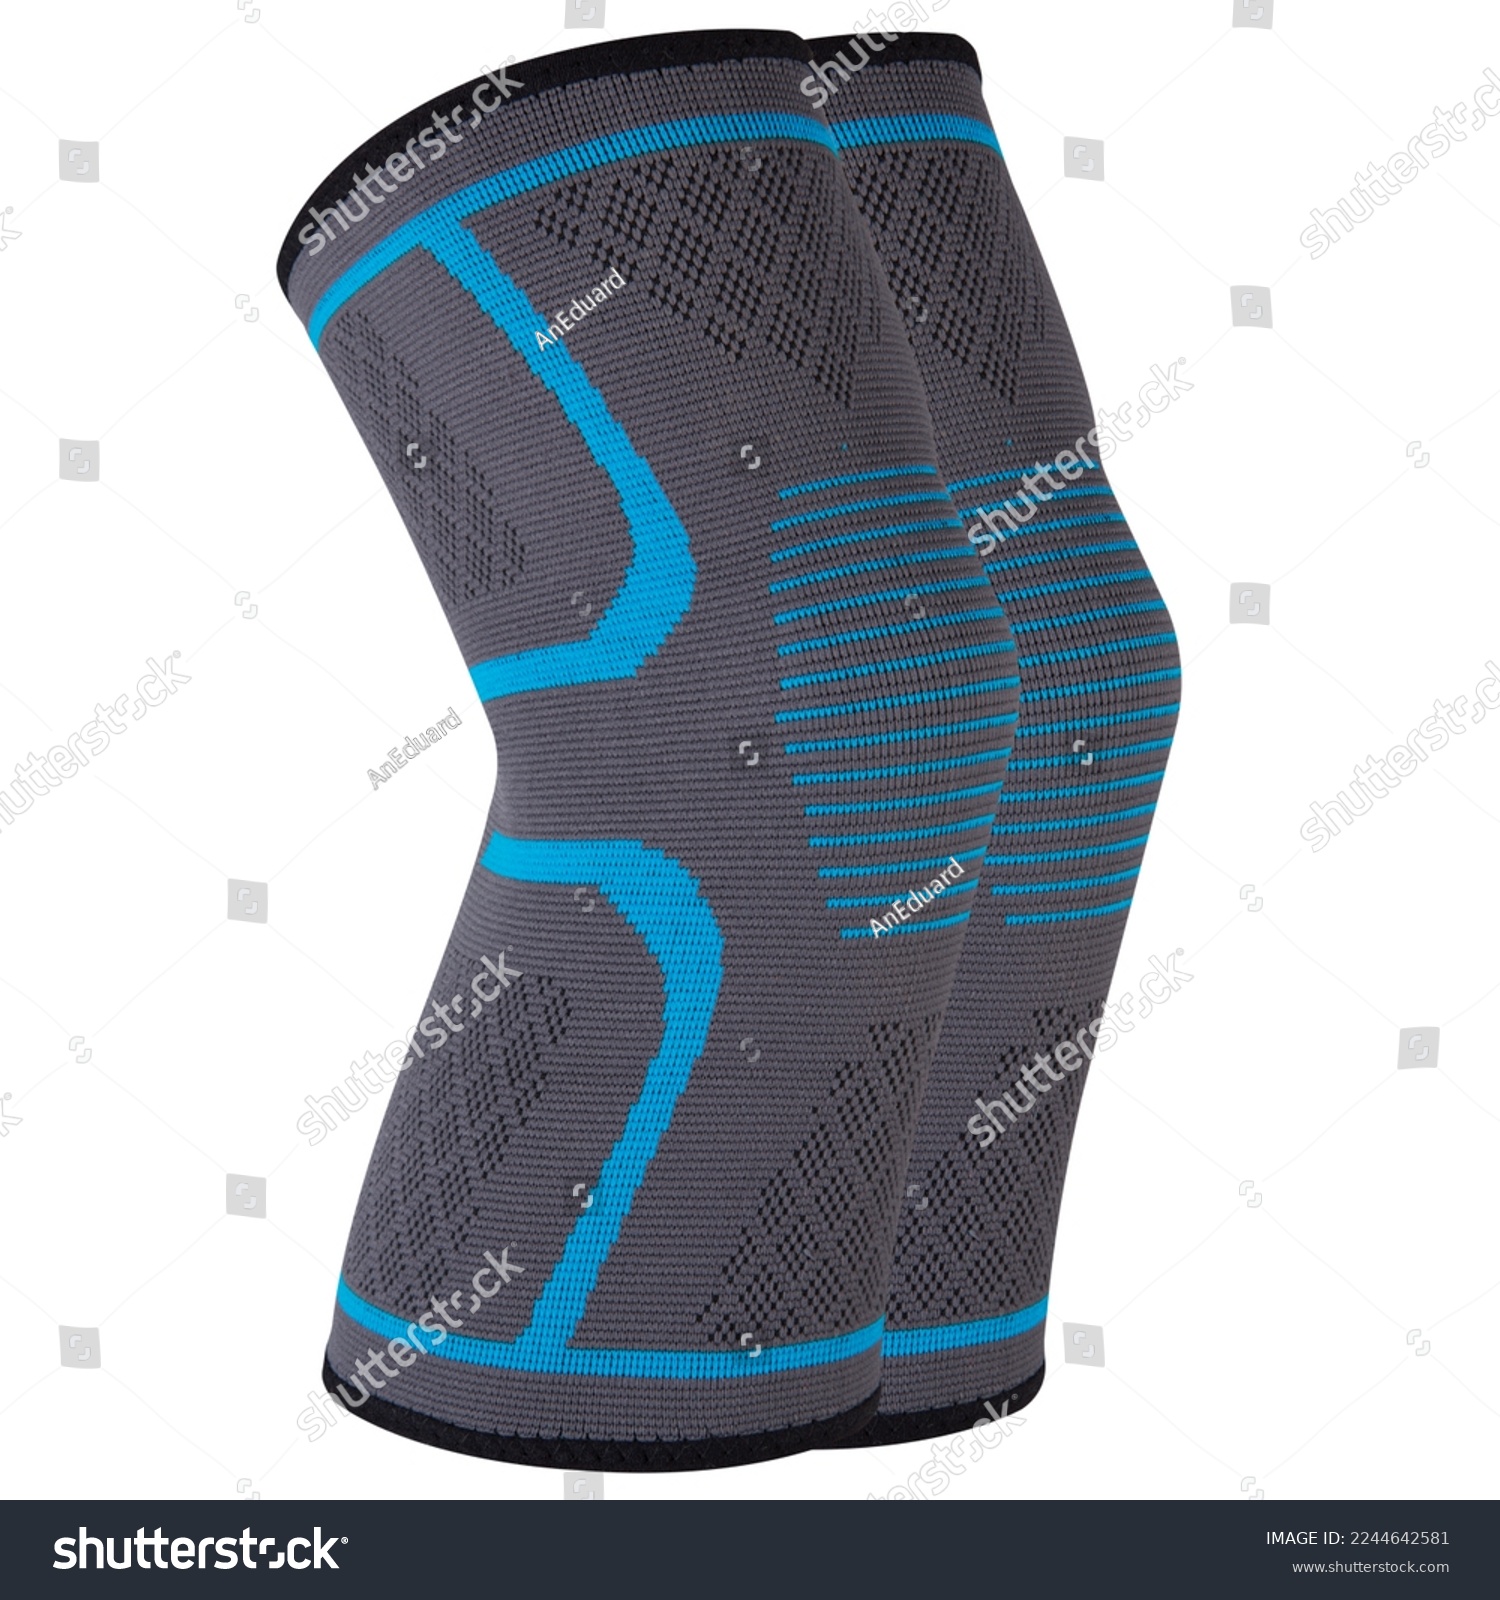 A pair of sports elastic knee pads with a blue pattern, for fixing and supporting the knee joints and ligaments, on a white background, isolate #2244642581